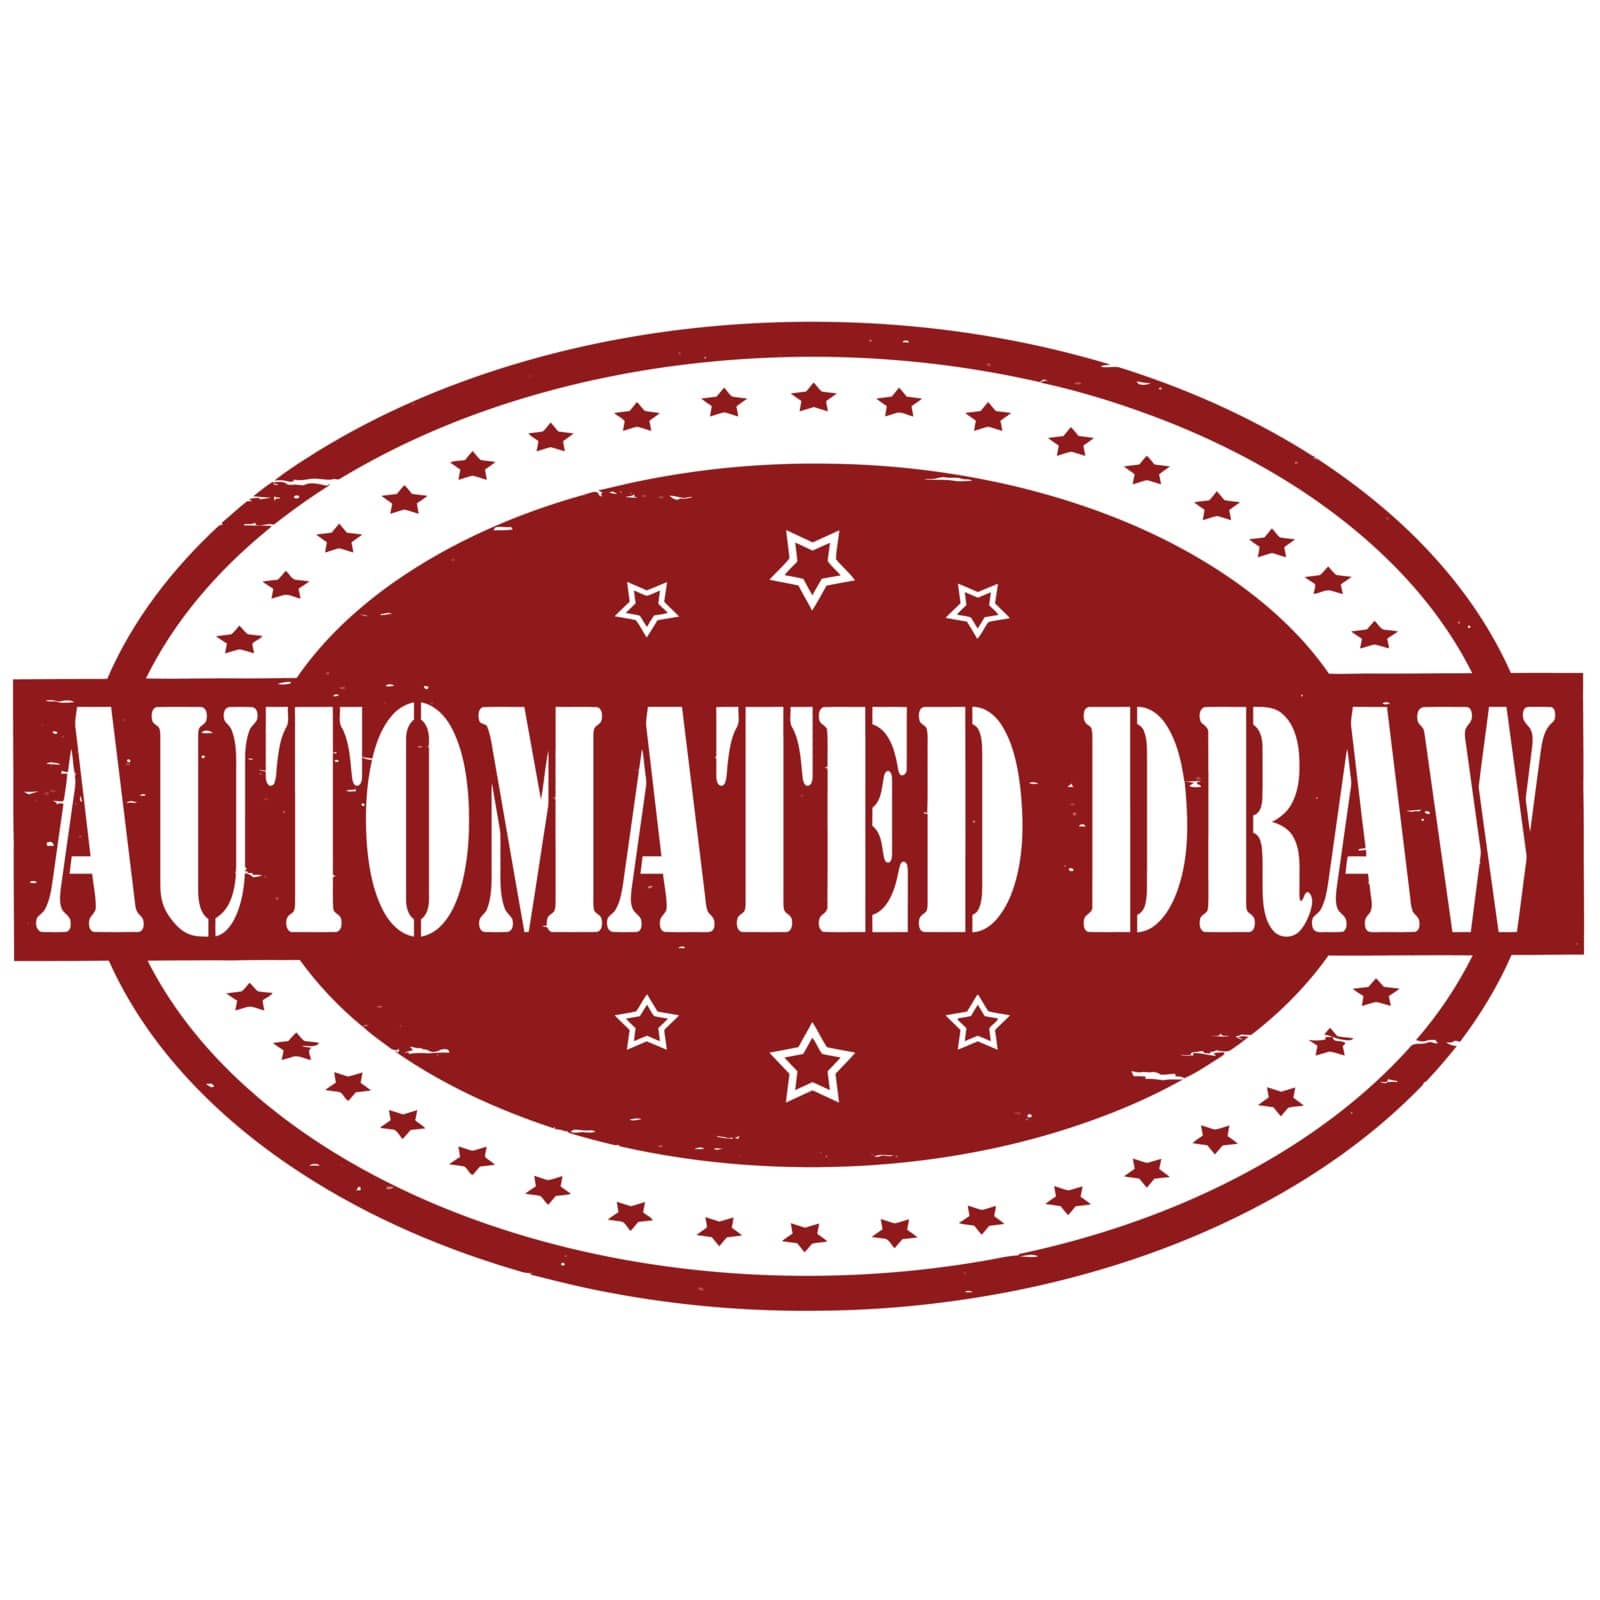 Automated draw by carmenbobo